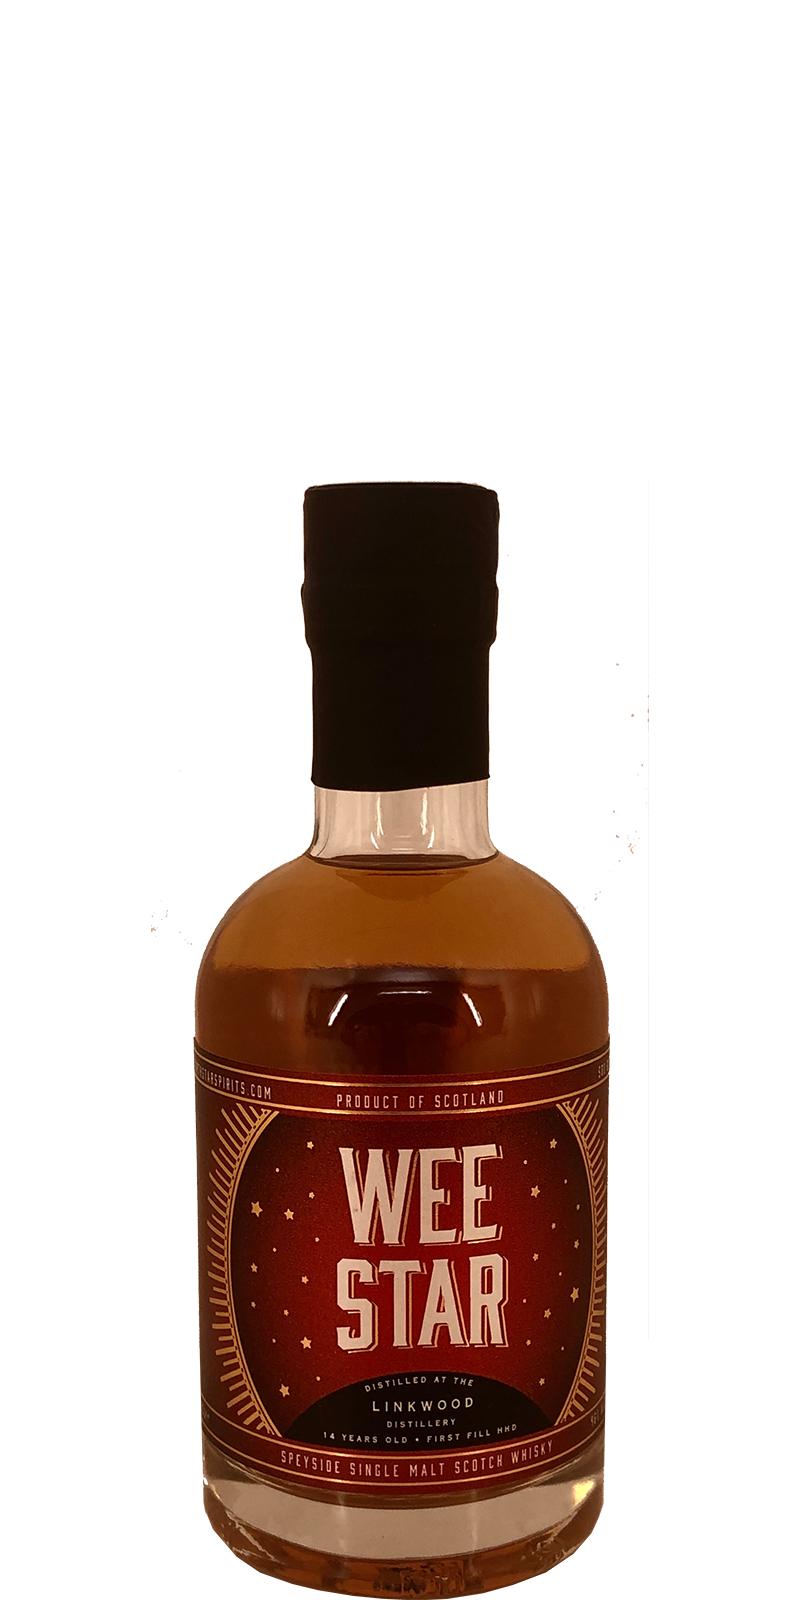 Linkwood 2007 NSS Wee Star Collection First Fill Hogshead 46% 200ml